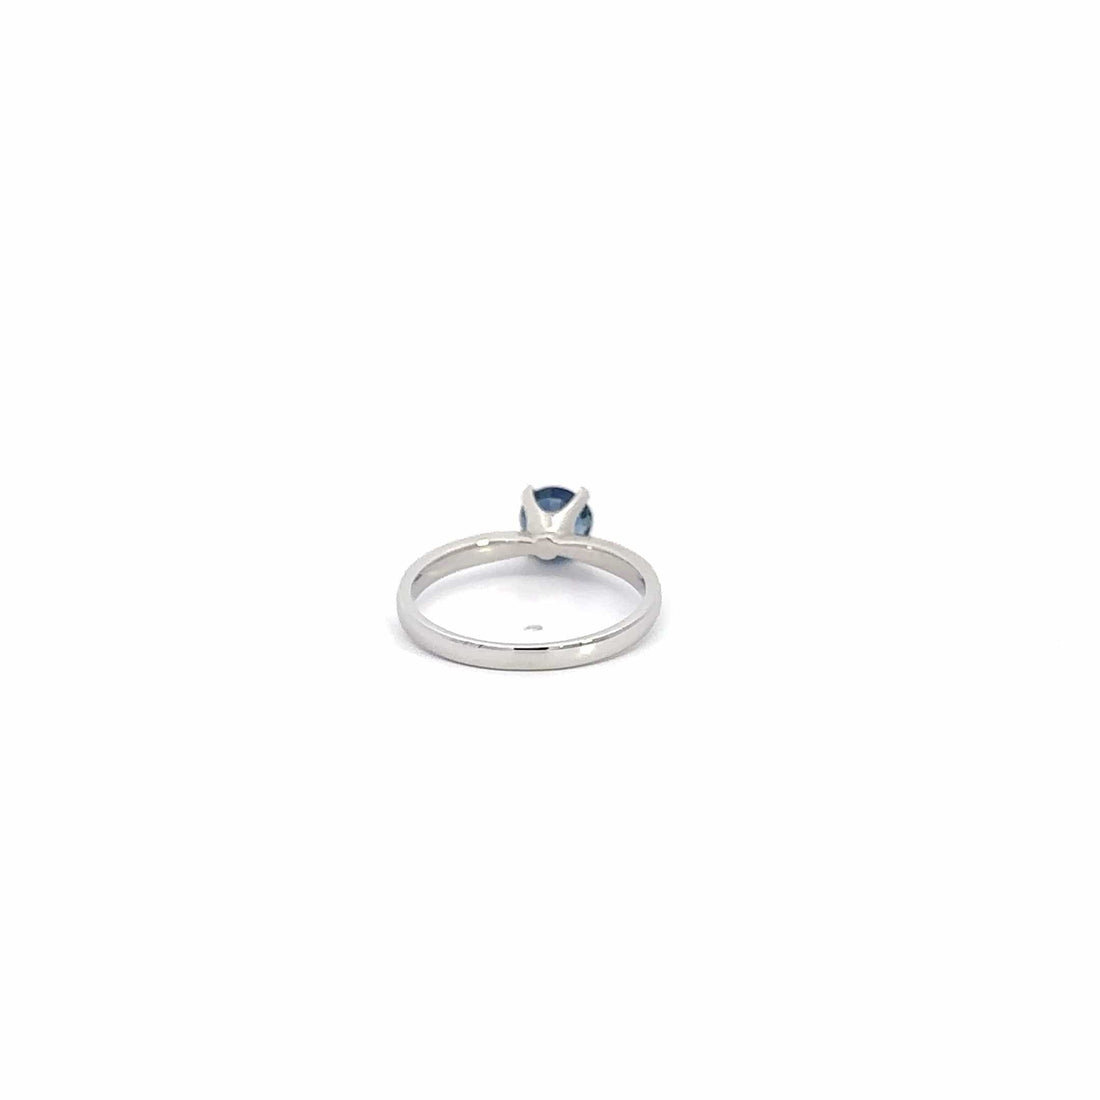 Baikalla Jewelry Gold Sapphire Ring 18k White Gold Natural Blue Sapphire Ring with Diamonds